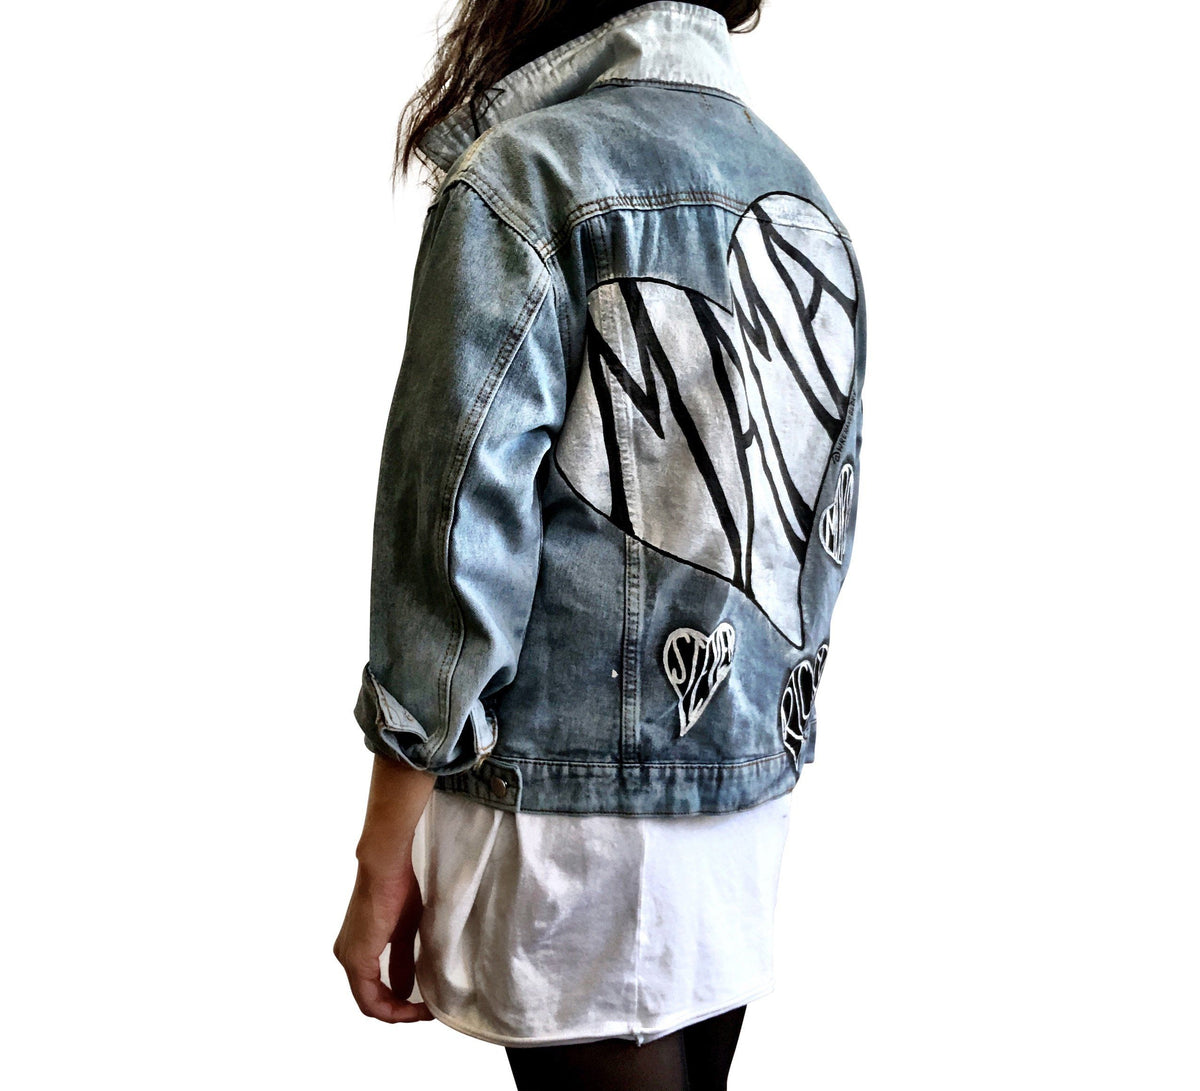 Lighter blue denim wash. Large white heart on back with MAMA painted inside in black. Smaller black hearts surrounding the larger one, customized with kids names. Collar and front pockets painted white. Signed @wrenandglory.